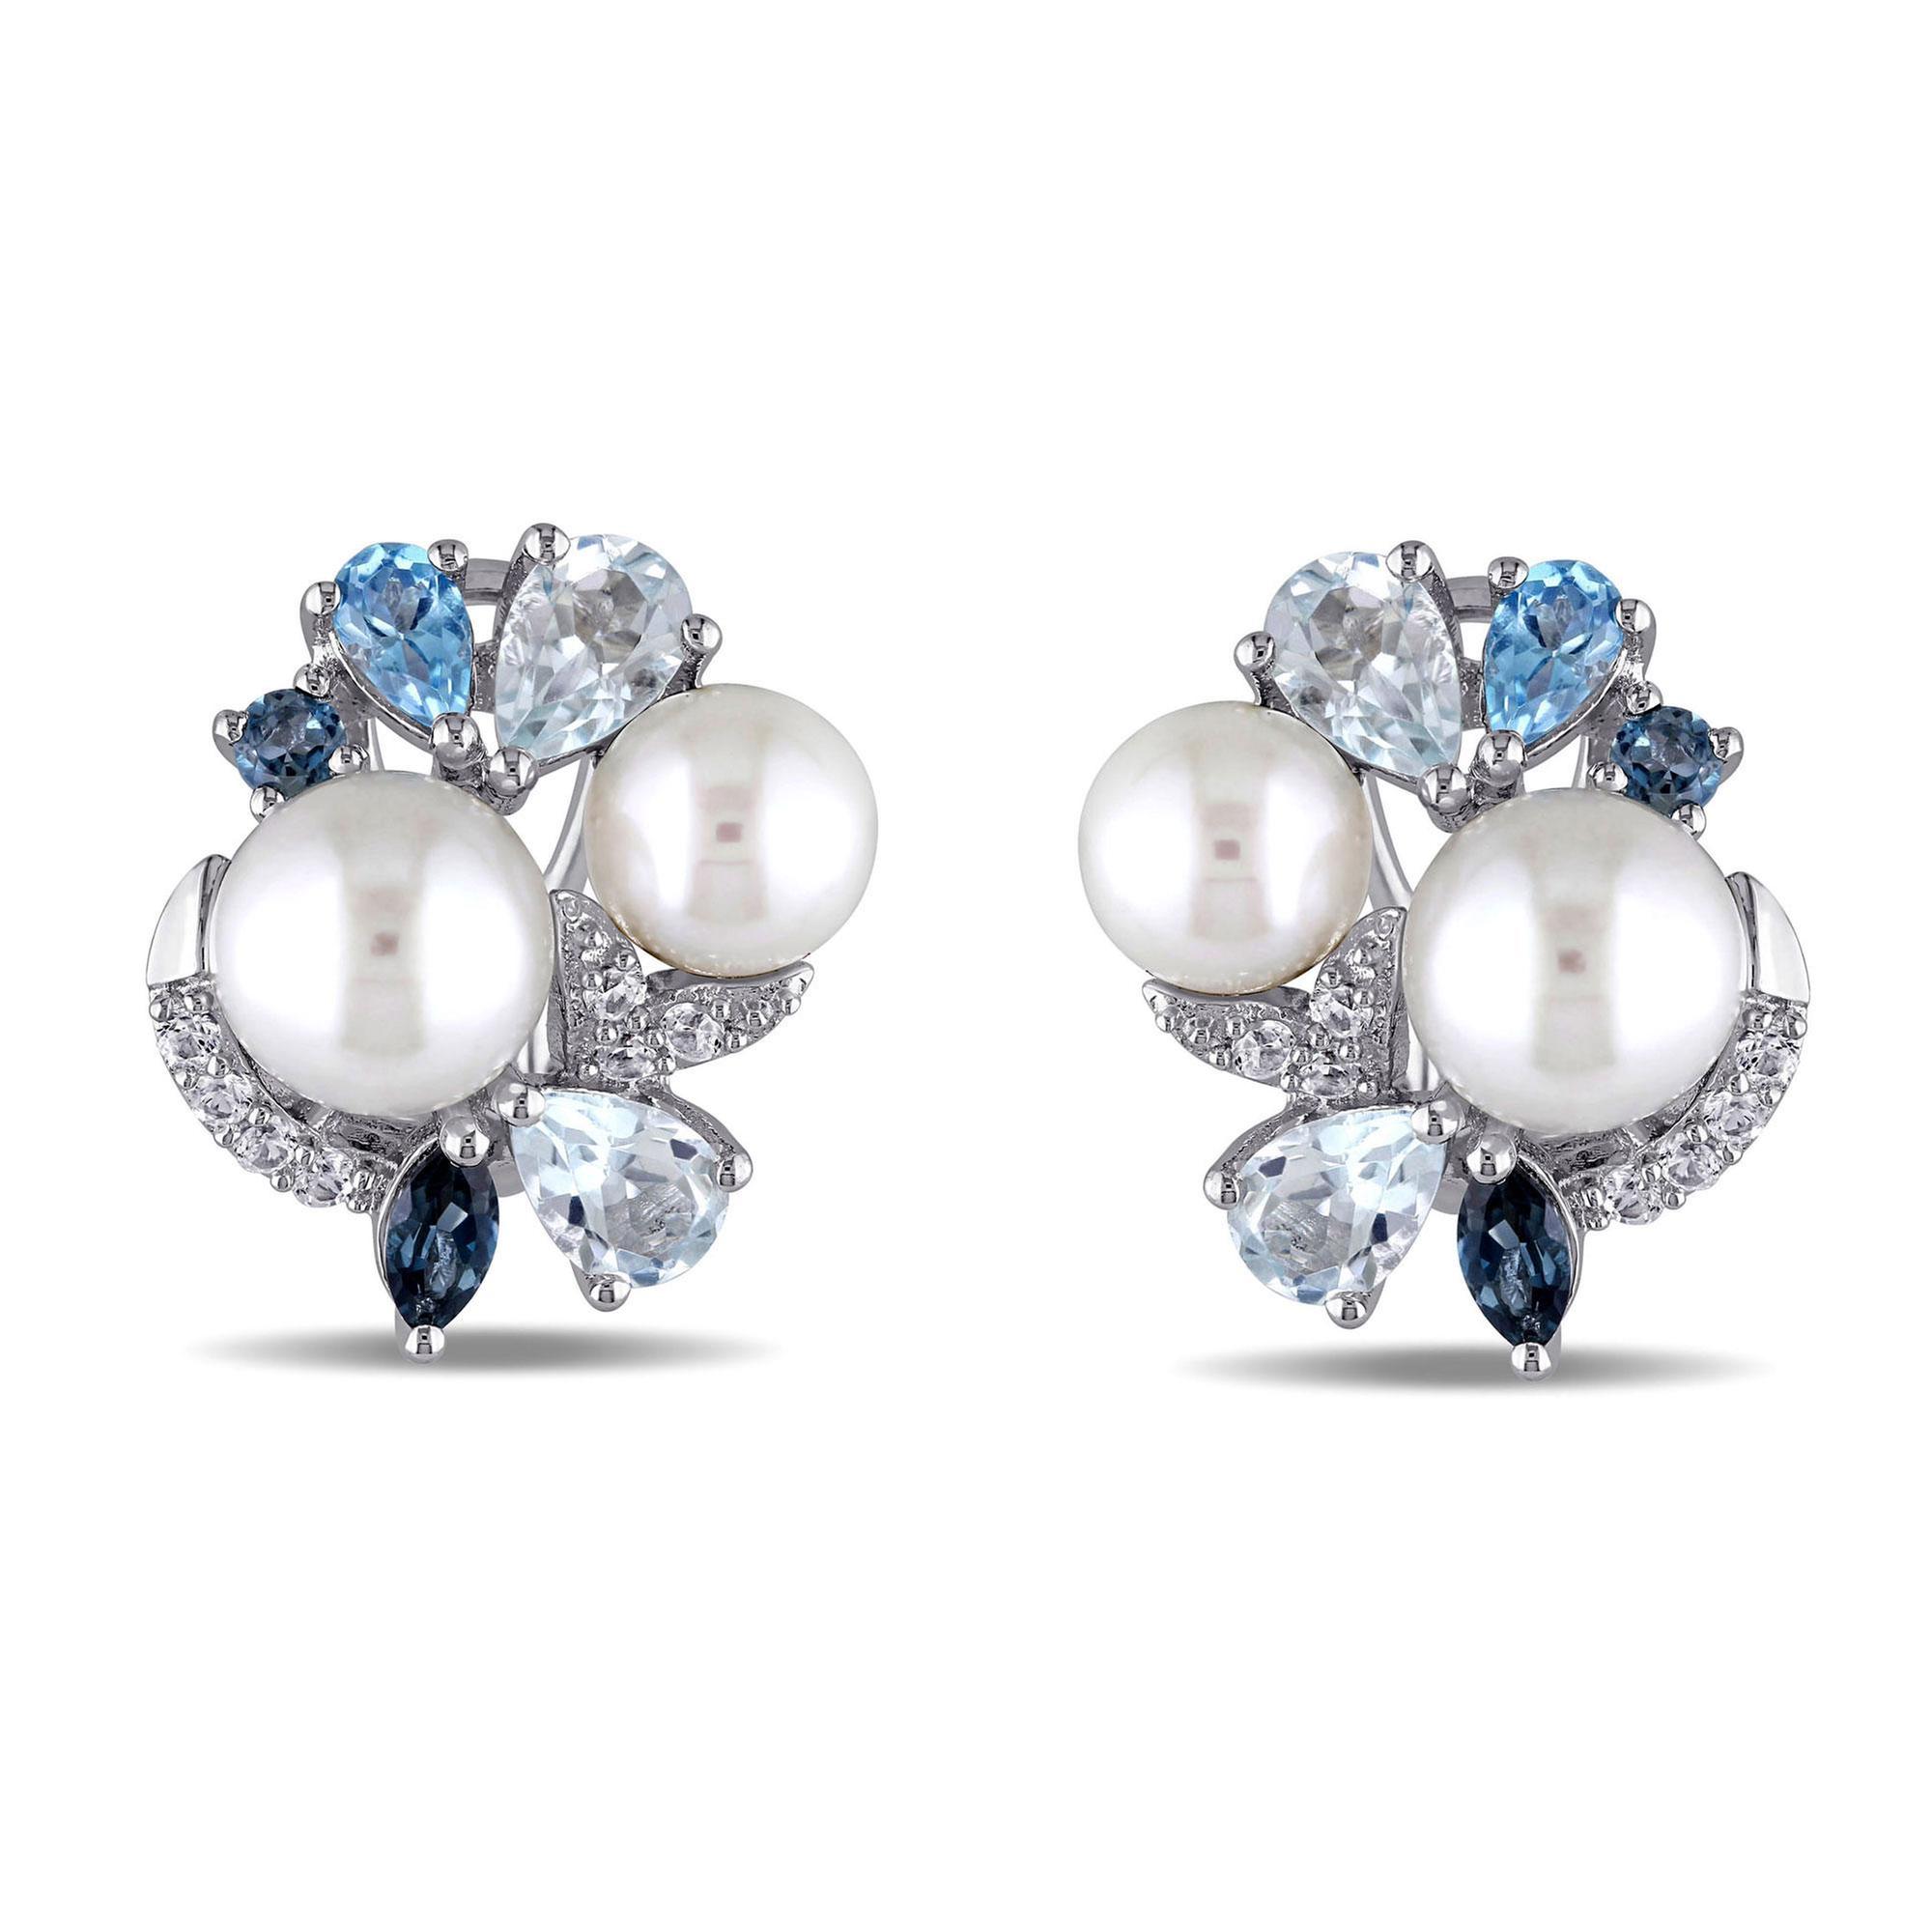 Blue Mixed Gemstone and White Freshwater Cultured Pearl Cluster Earrings in Sterling Silver